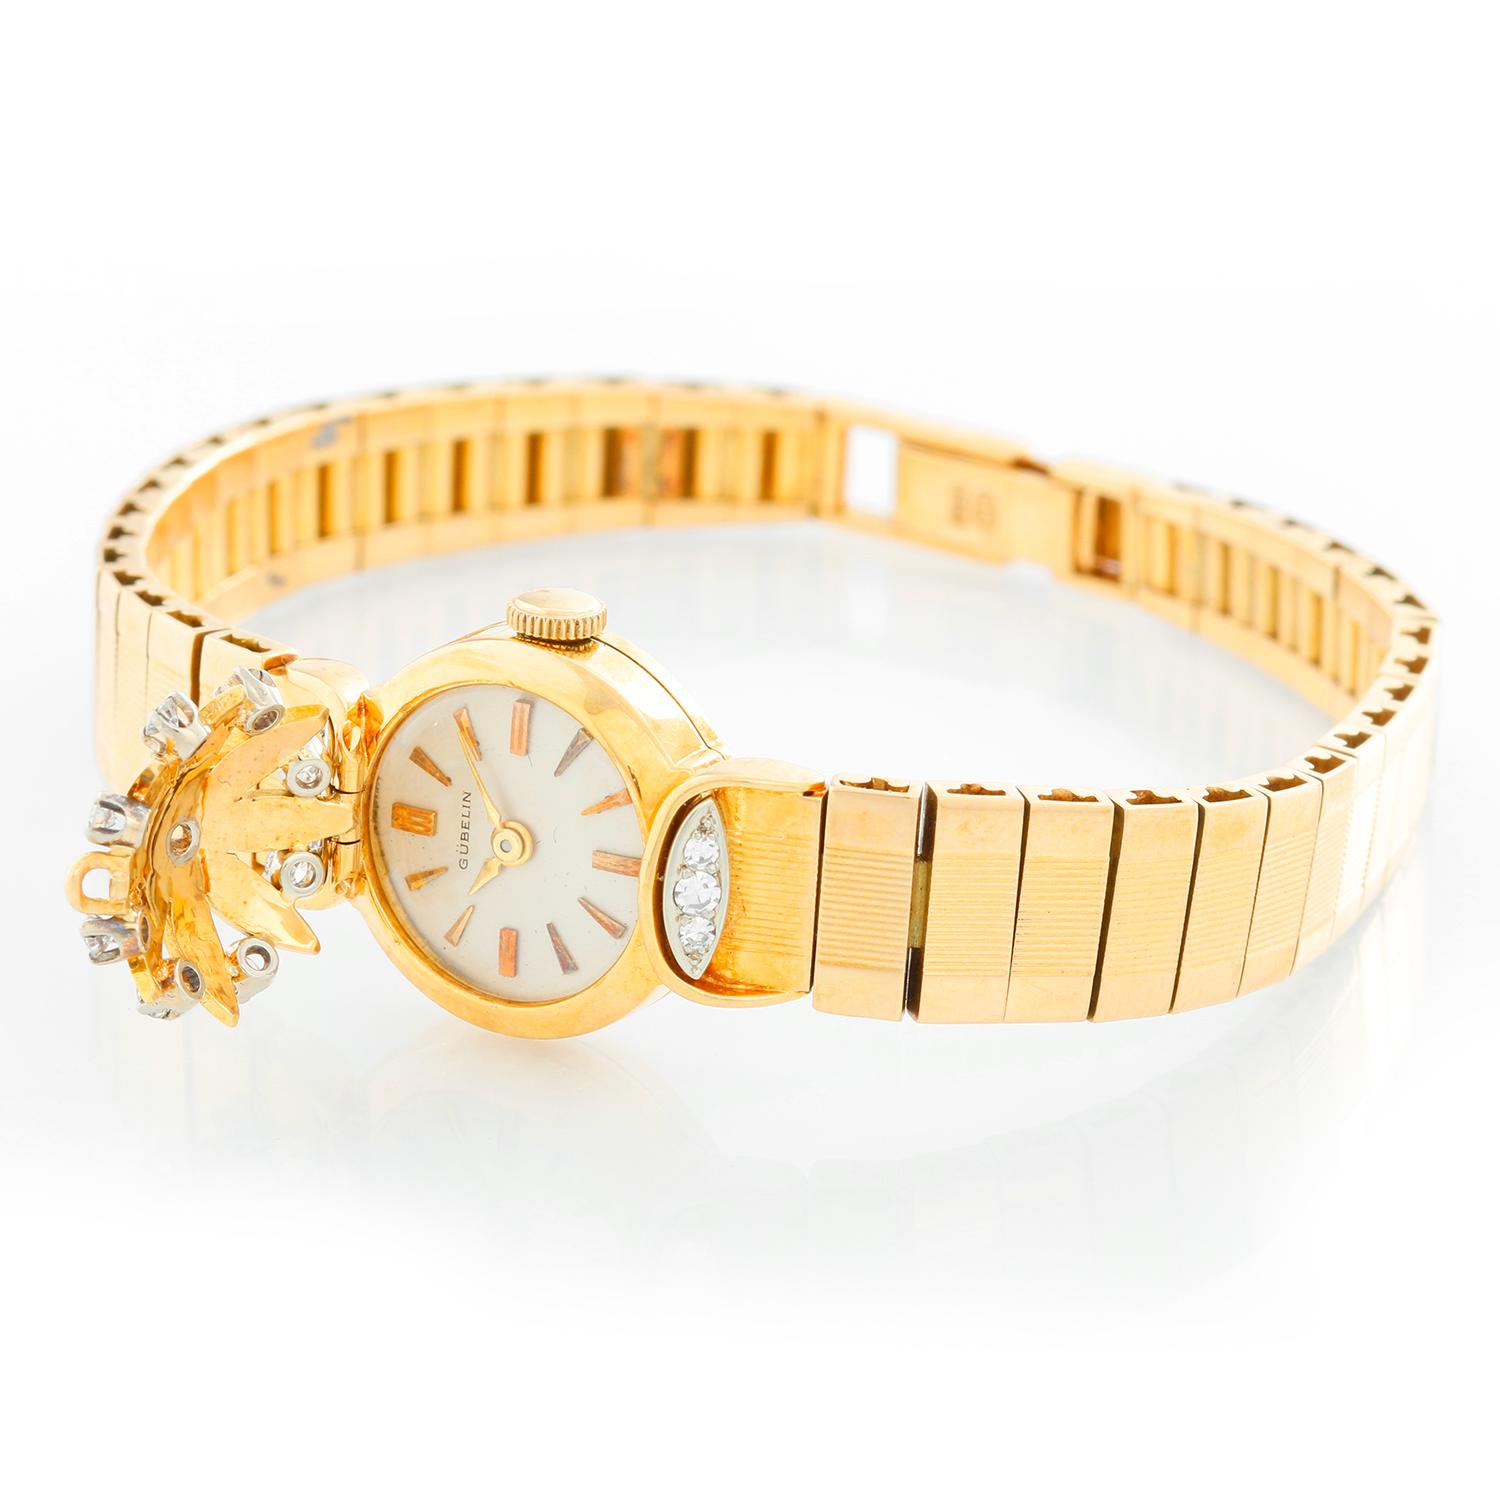 Gubelin lady's 18k yellow gold and diamond bracelet watch with concealed dial and manual-wind movement. 18k yellow gold case with flower-petal-shaped cover over dial. Silvered dial with gild markers. 18k yellow gold bracelet (will fit 6-3/4-in.